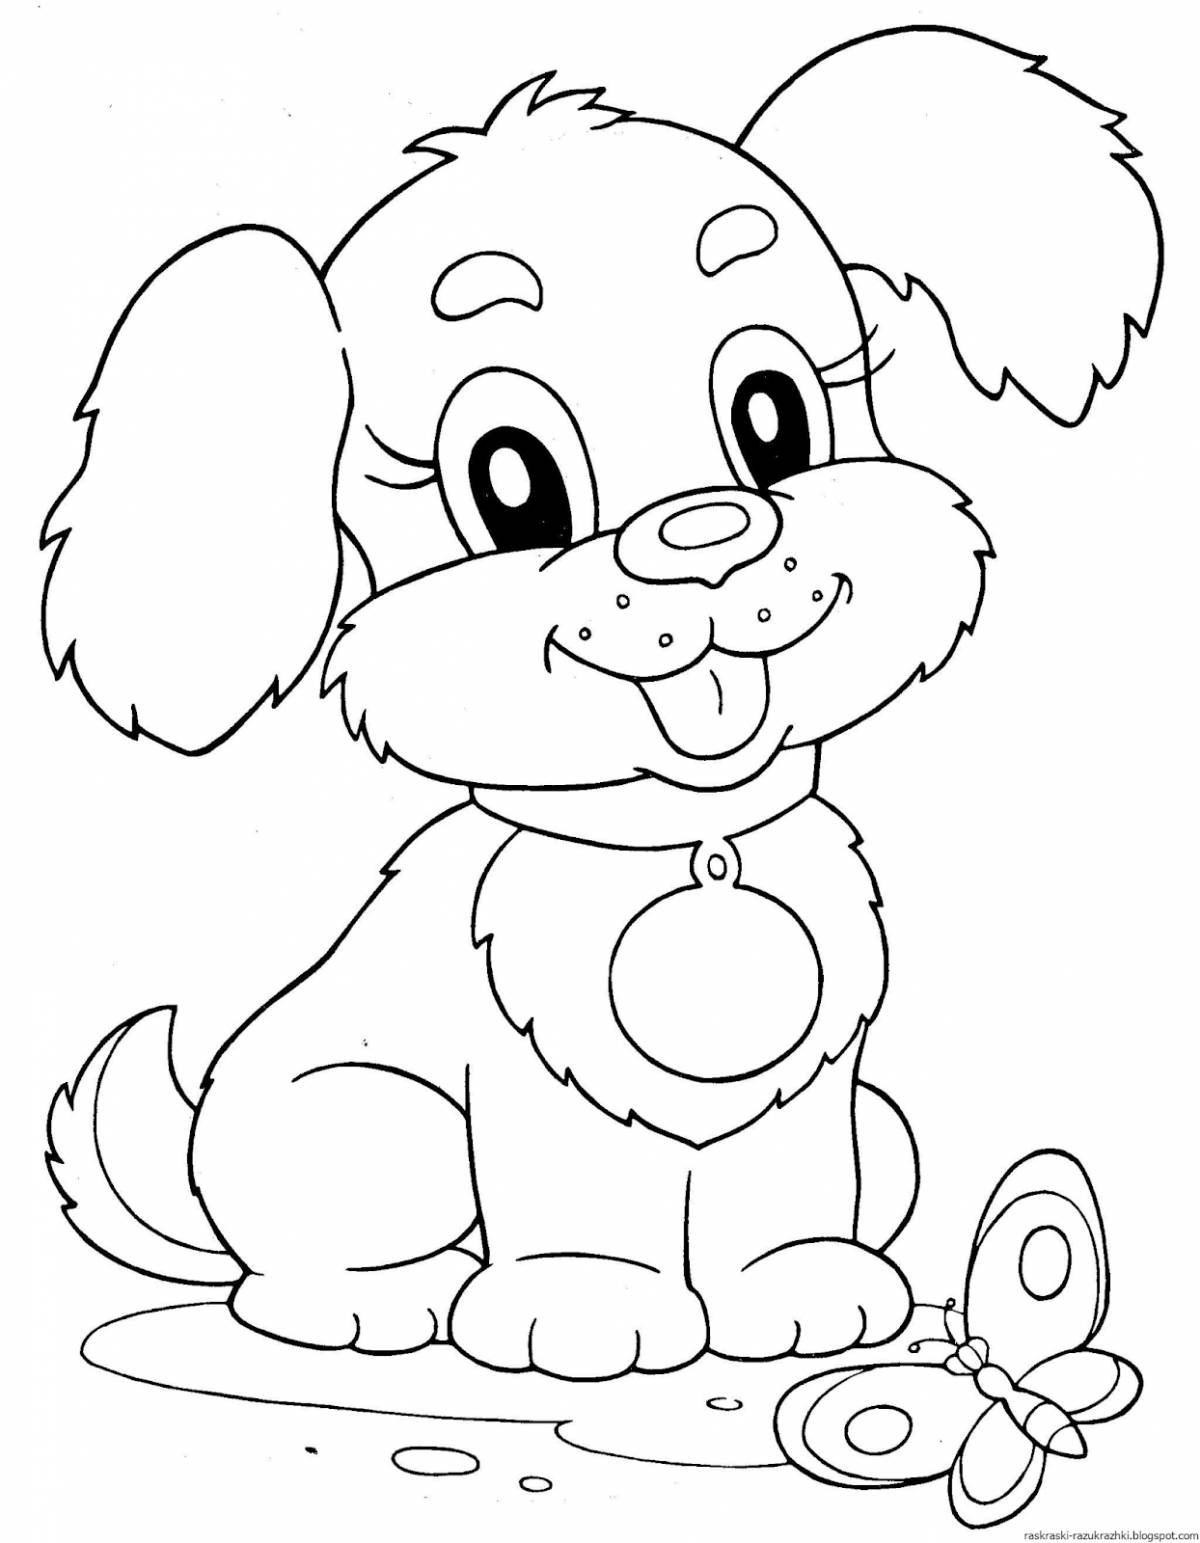 Affectionate coloring pages of pets for children 3-4 years old